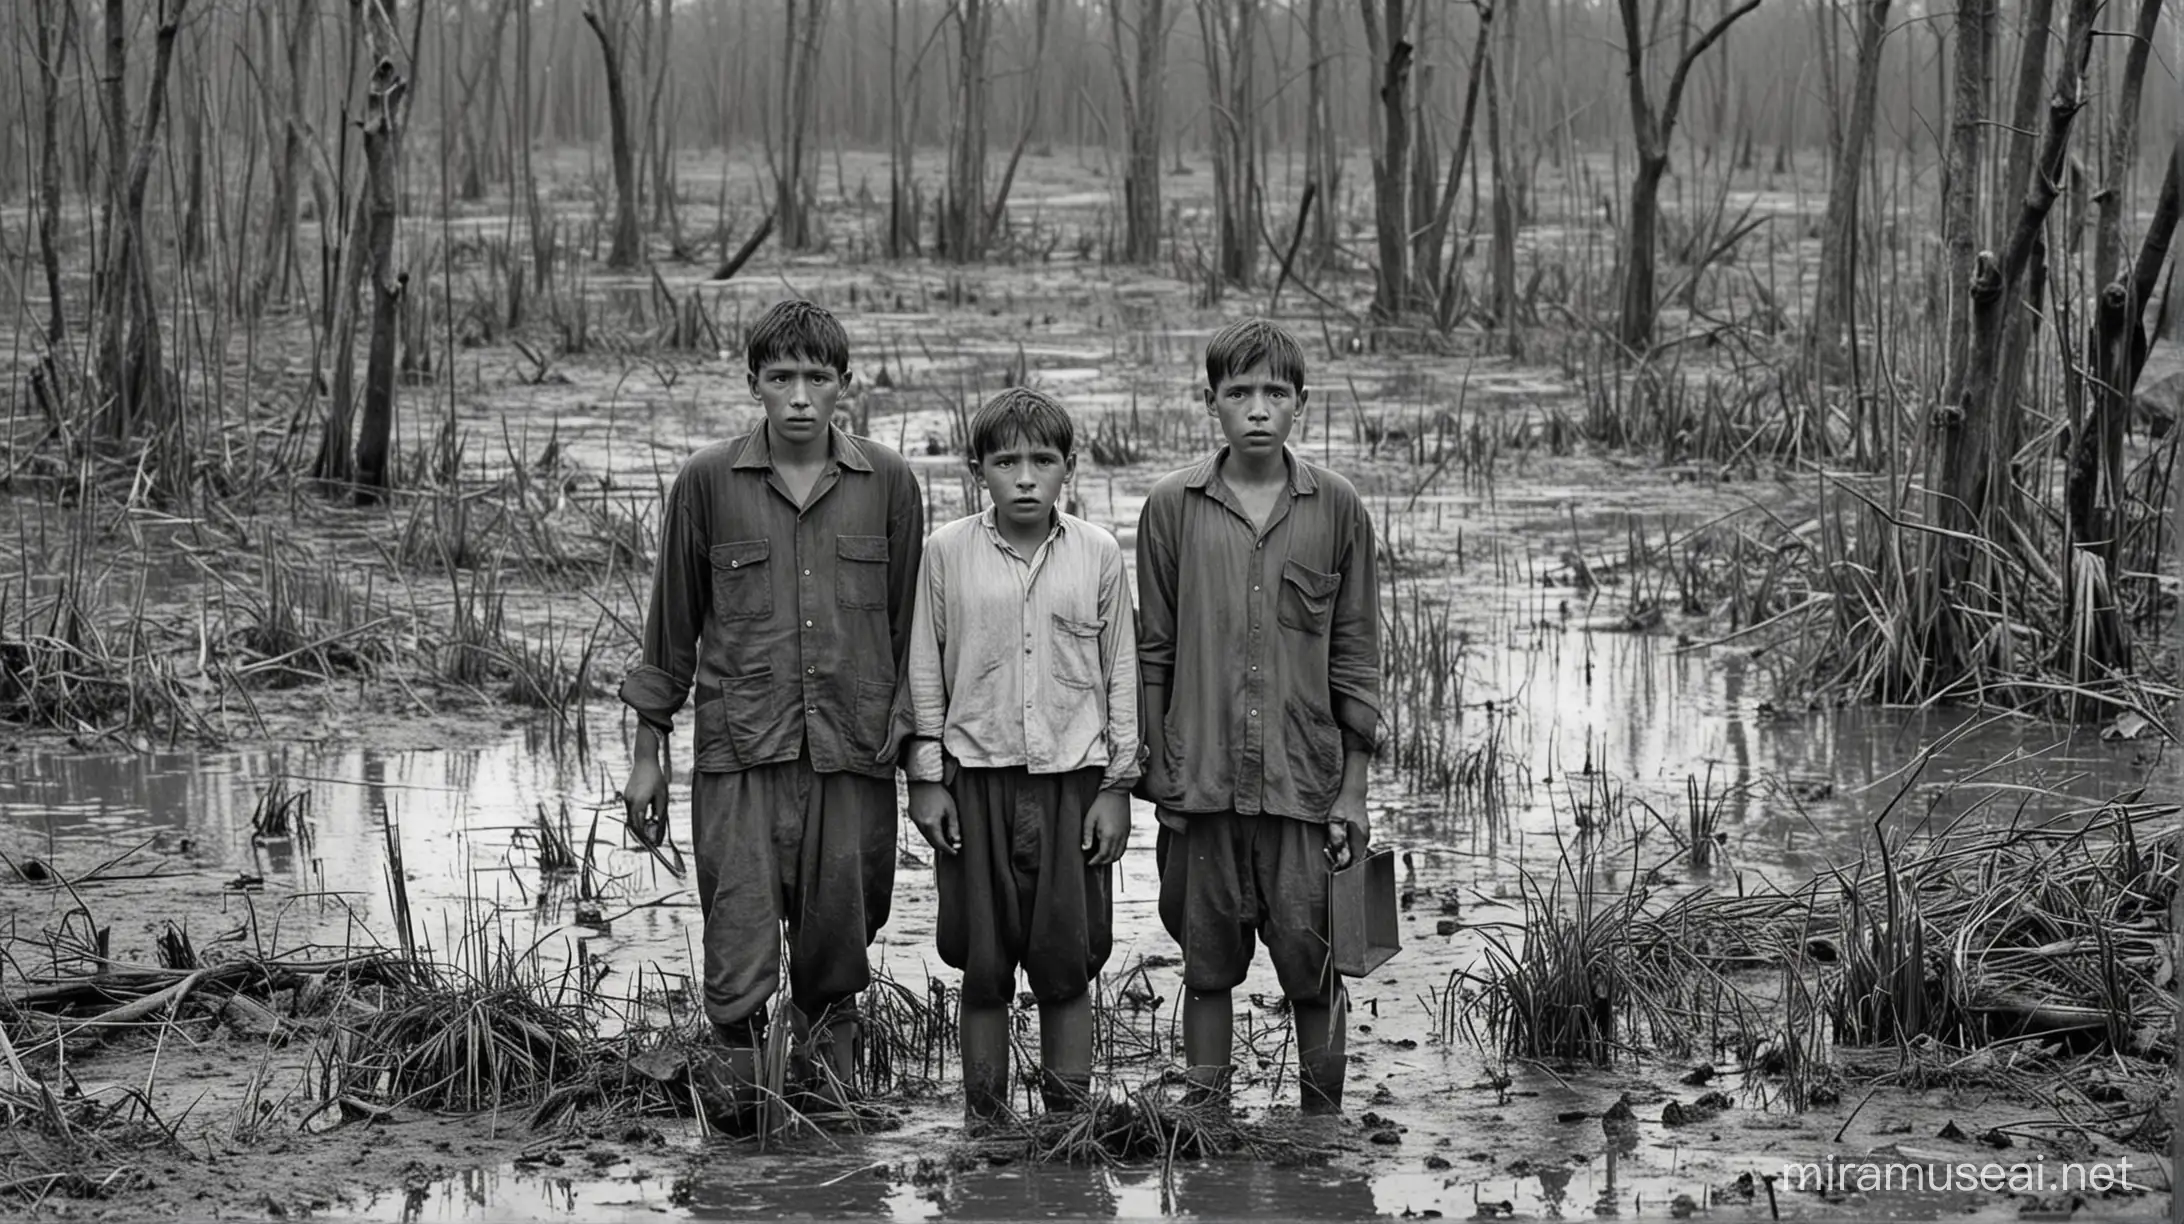 3 villagers looking frightened into the swamp. year 1950